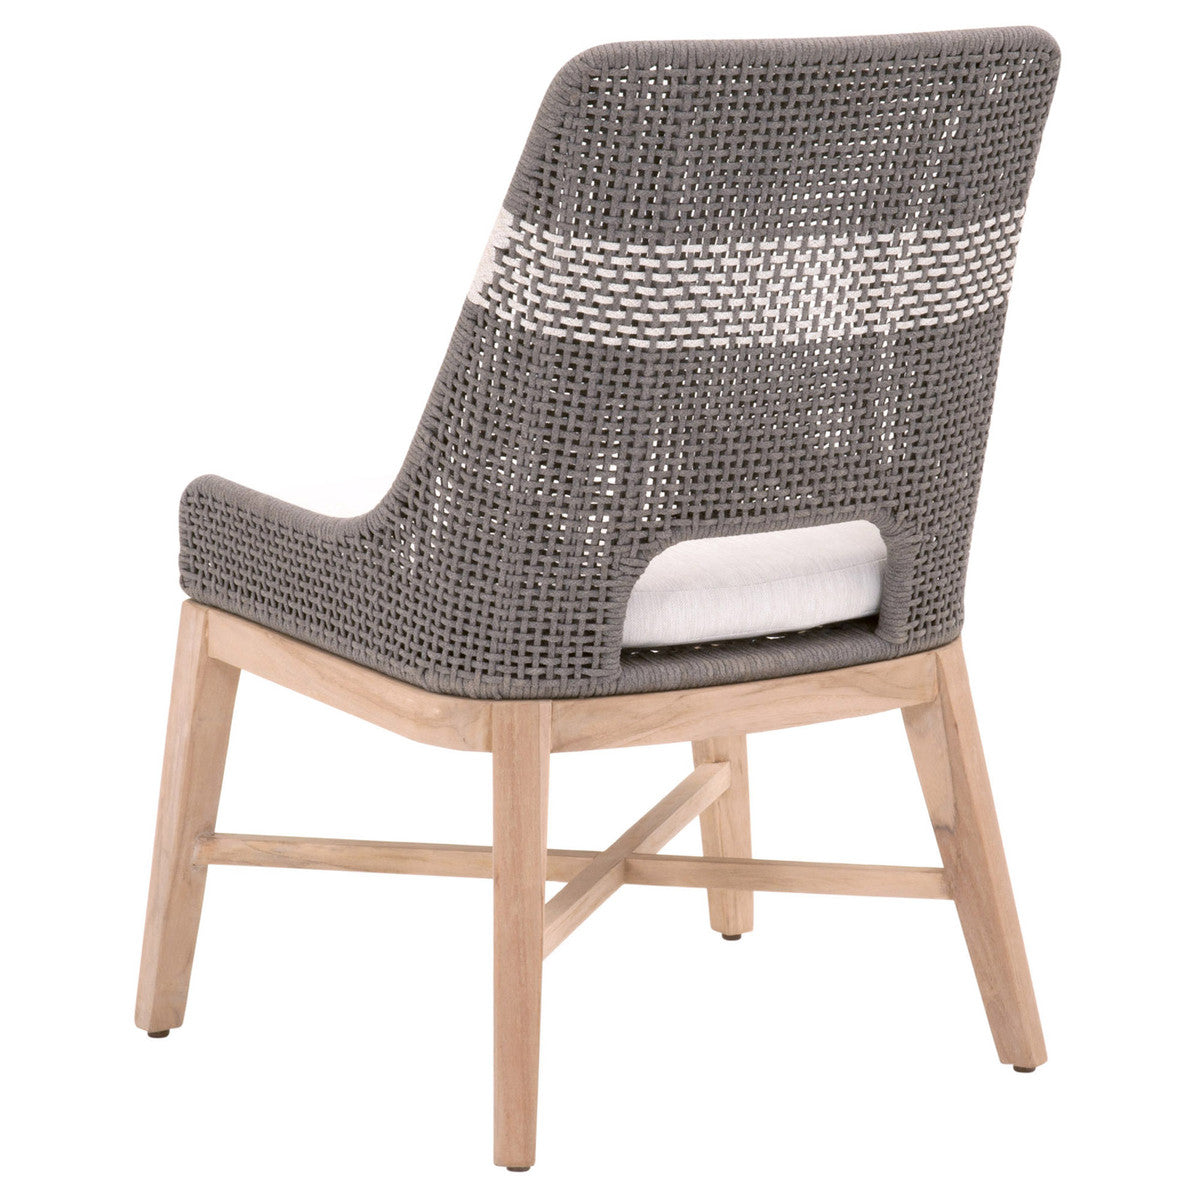 Tapestry Outdoor Dining Chair